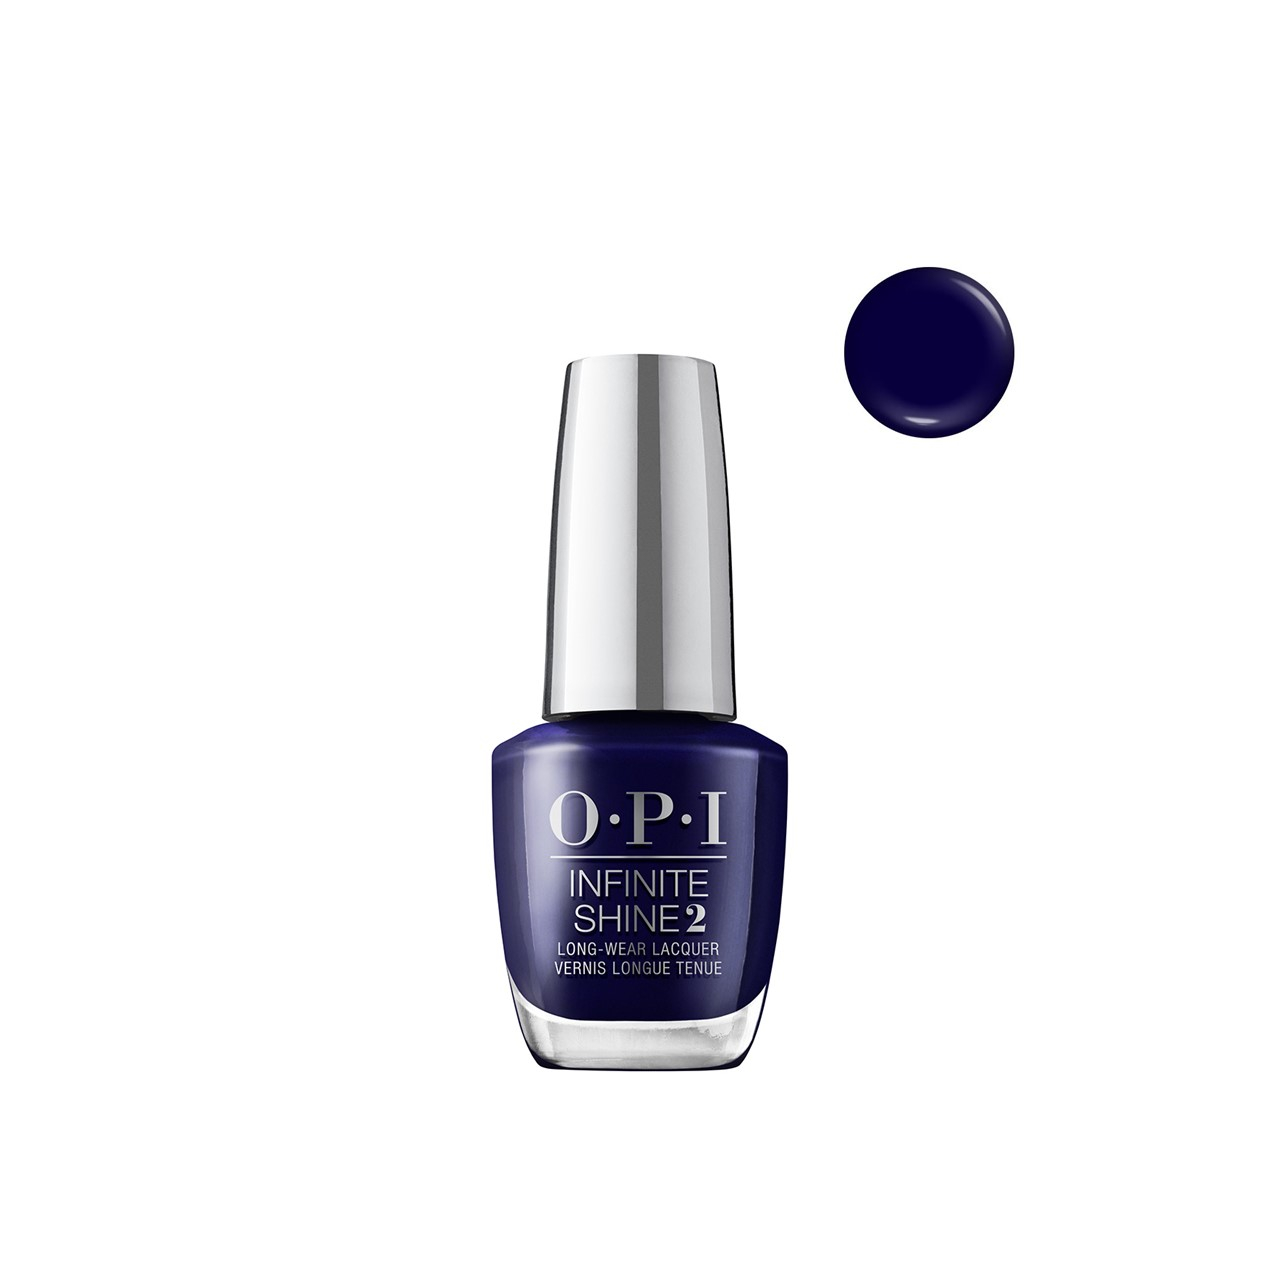 OPI Infinite Shine 2 Lacquer Award for Best Nails Goes To... 15ml (0.51fl oz)